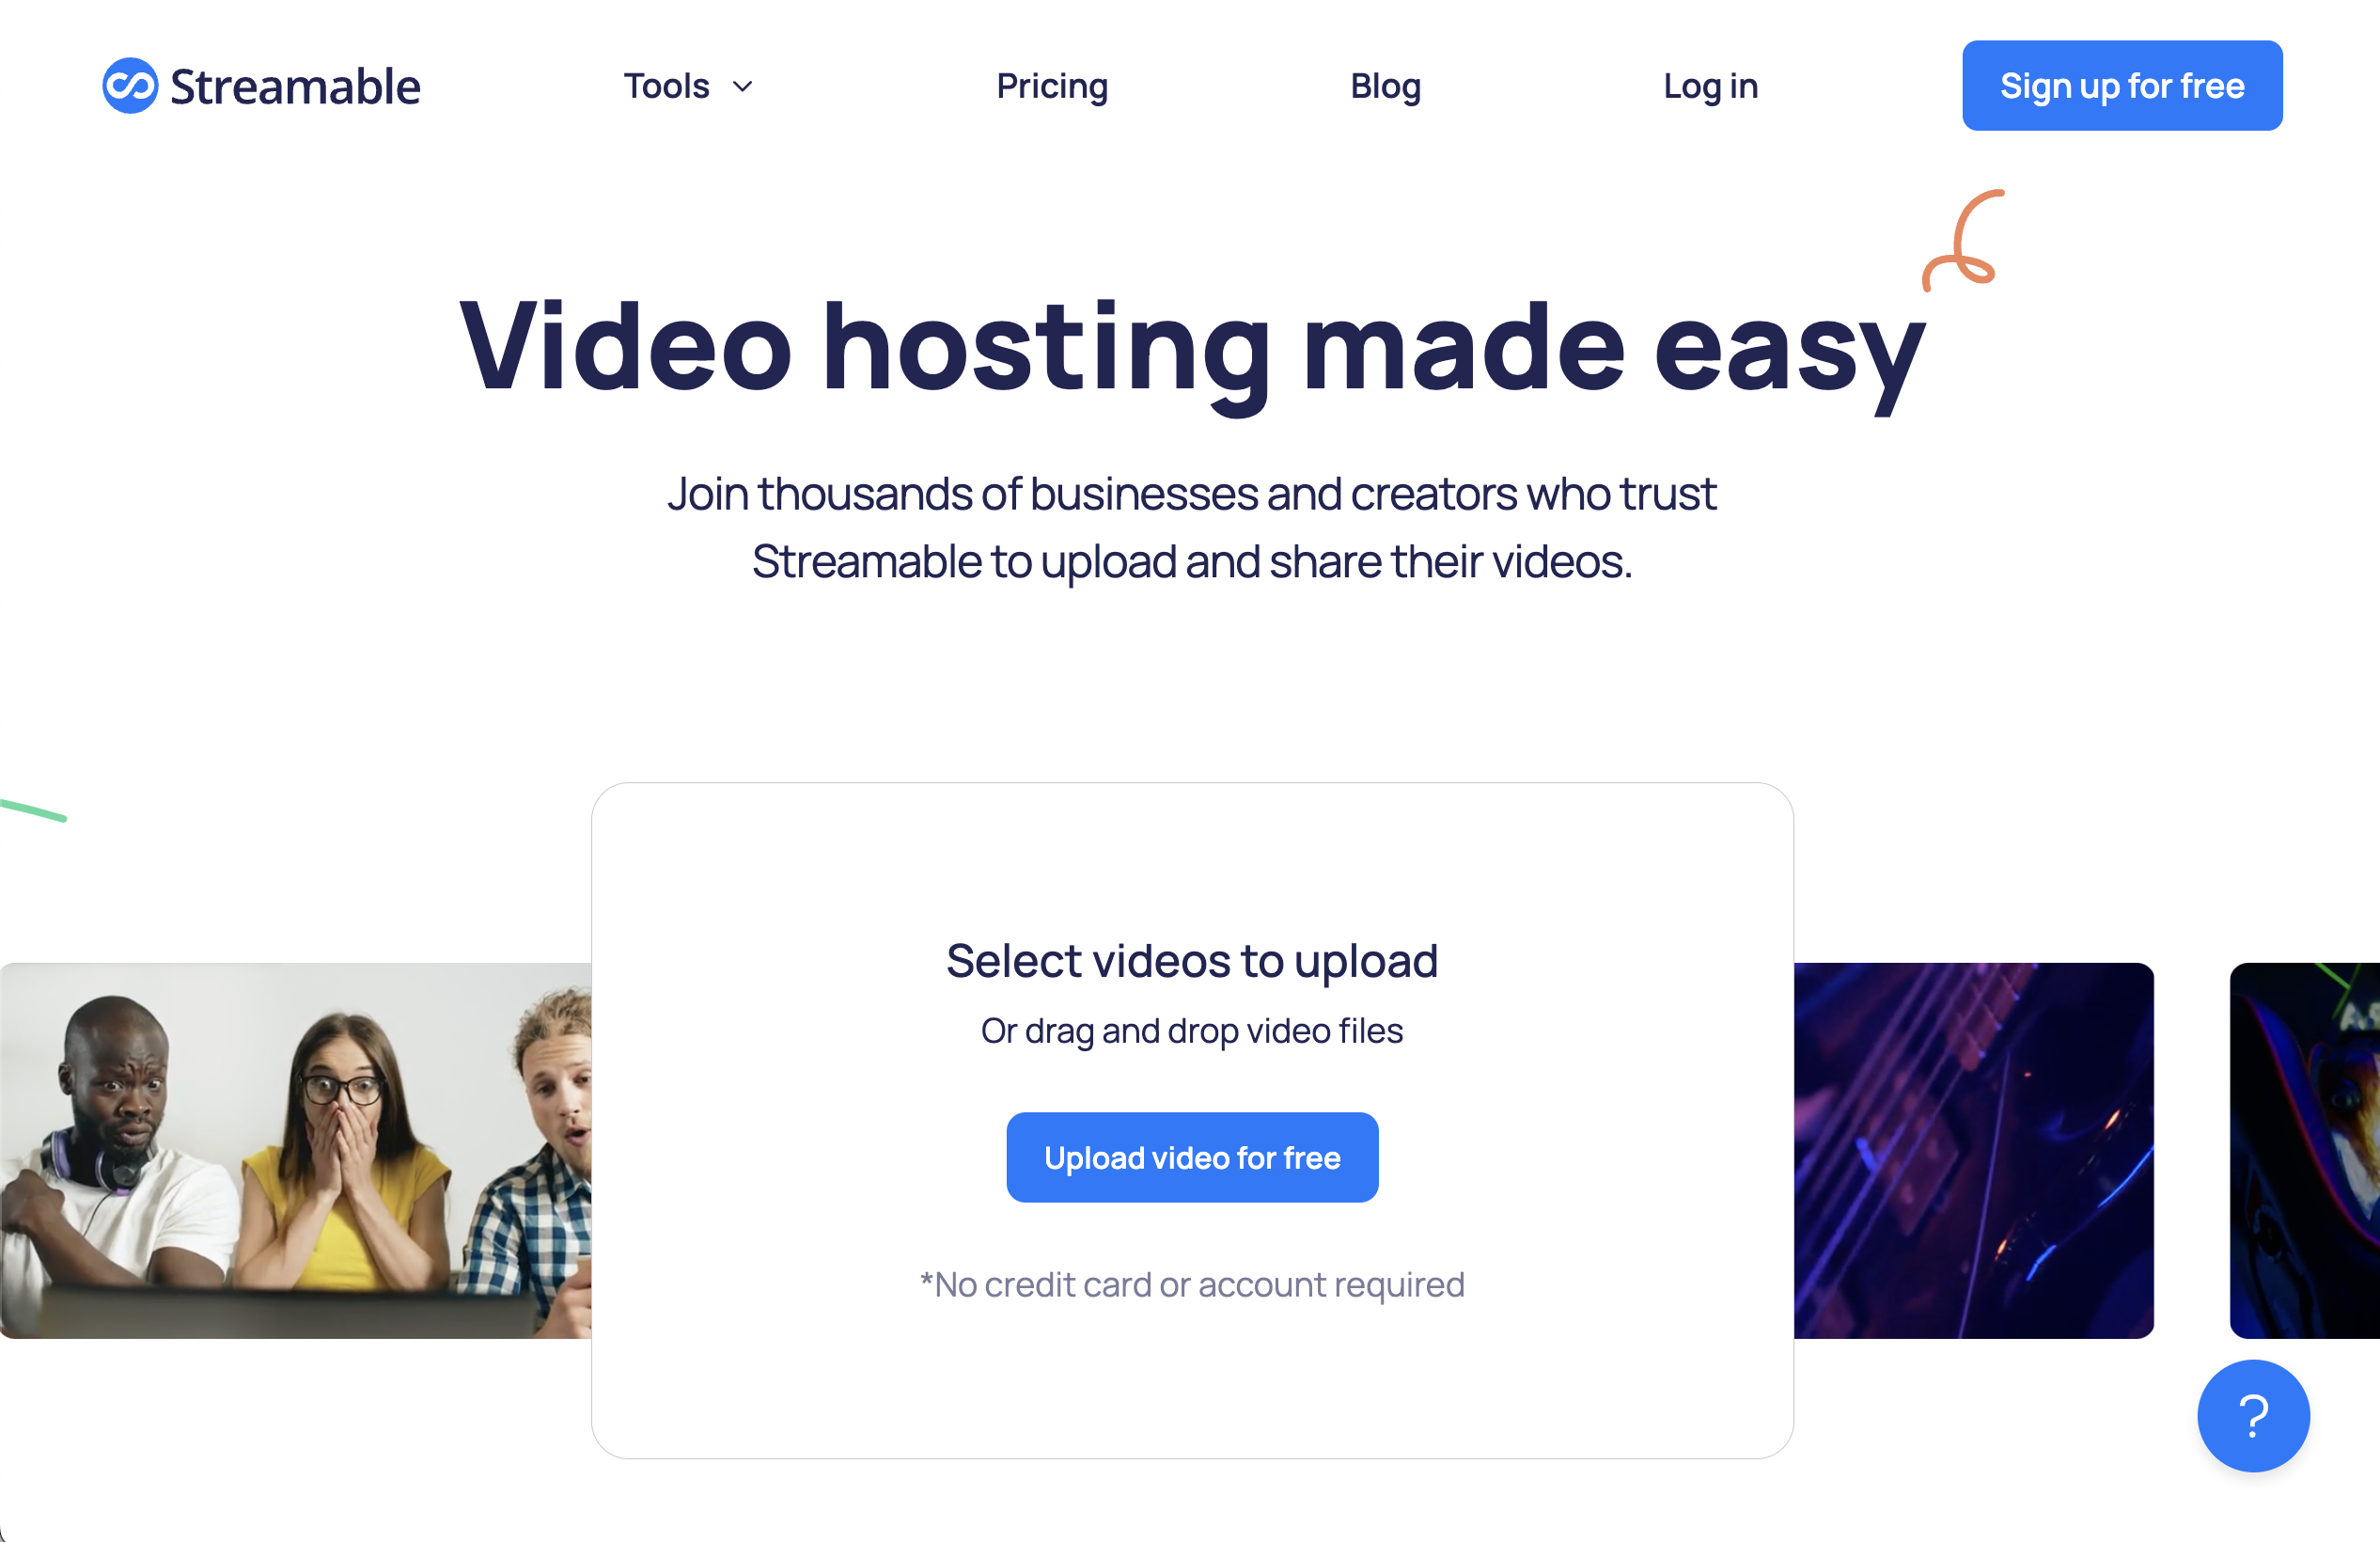 Streamable: A Simple But Powerful Video Hosting Solution